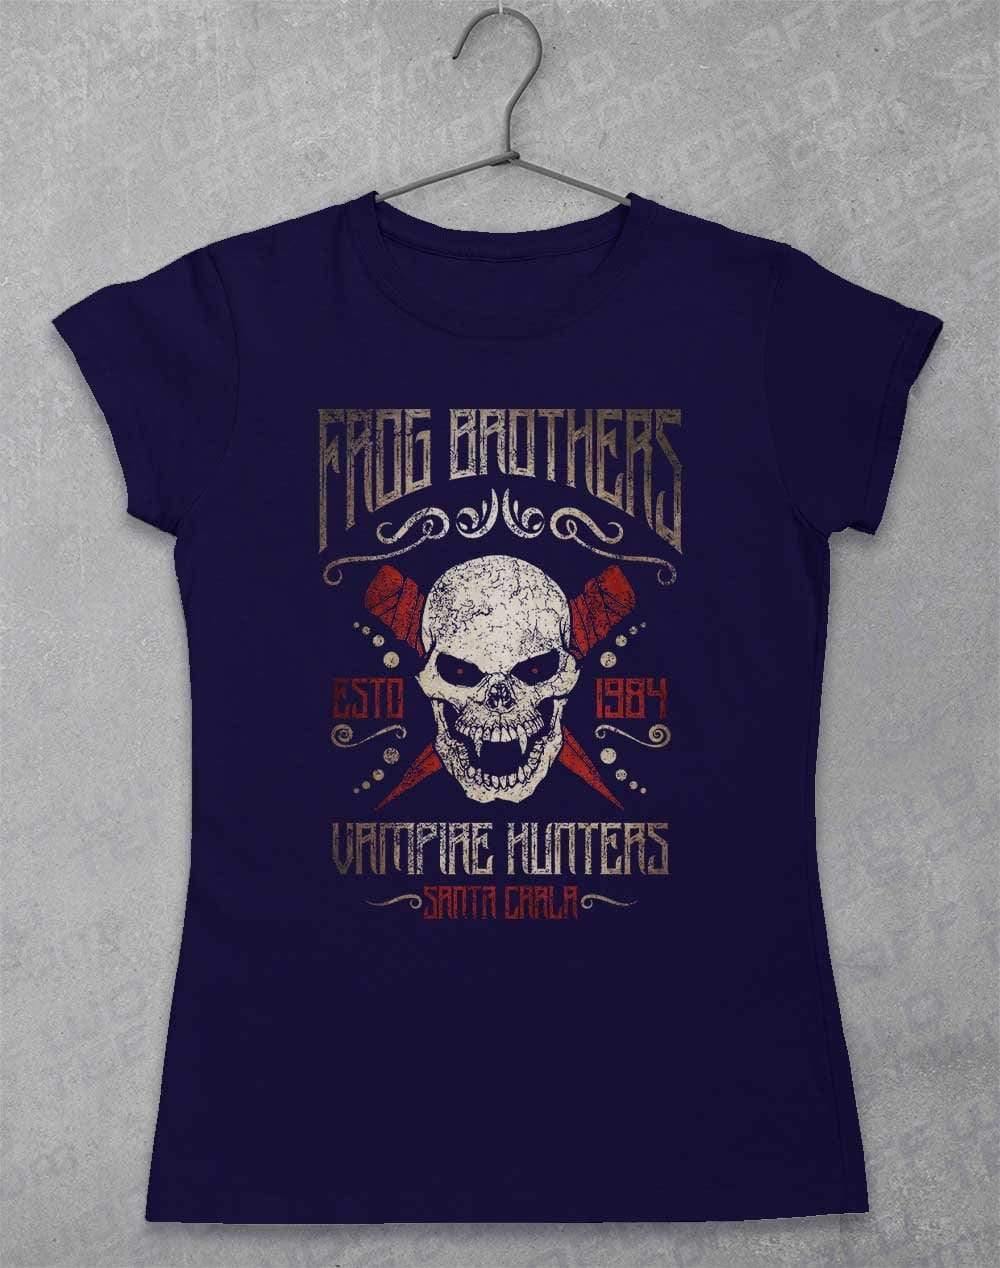 Frog Brothers - Women's T-Shirt 8-10 / Navy  - Off World Tees